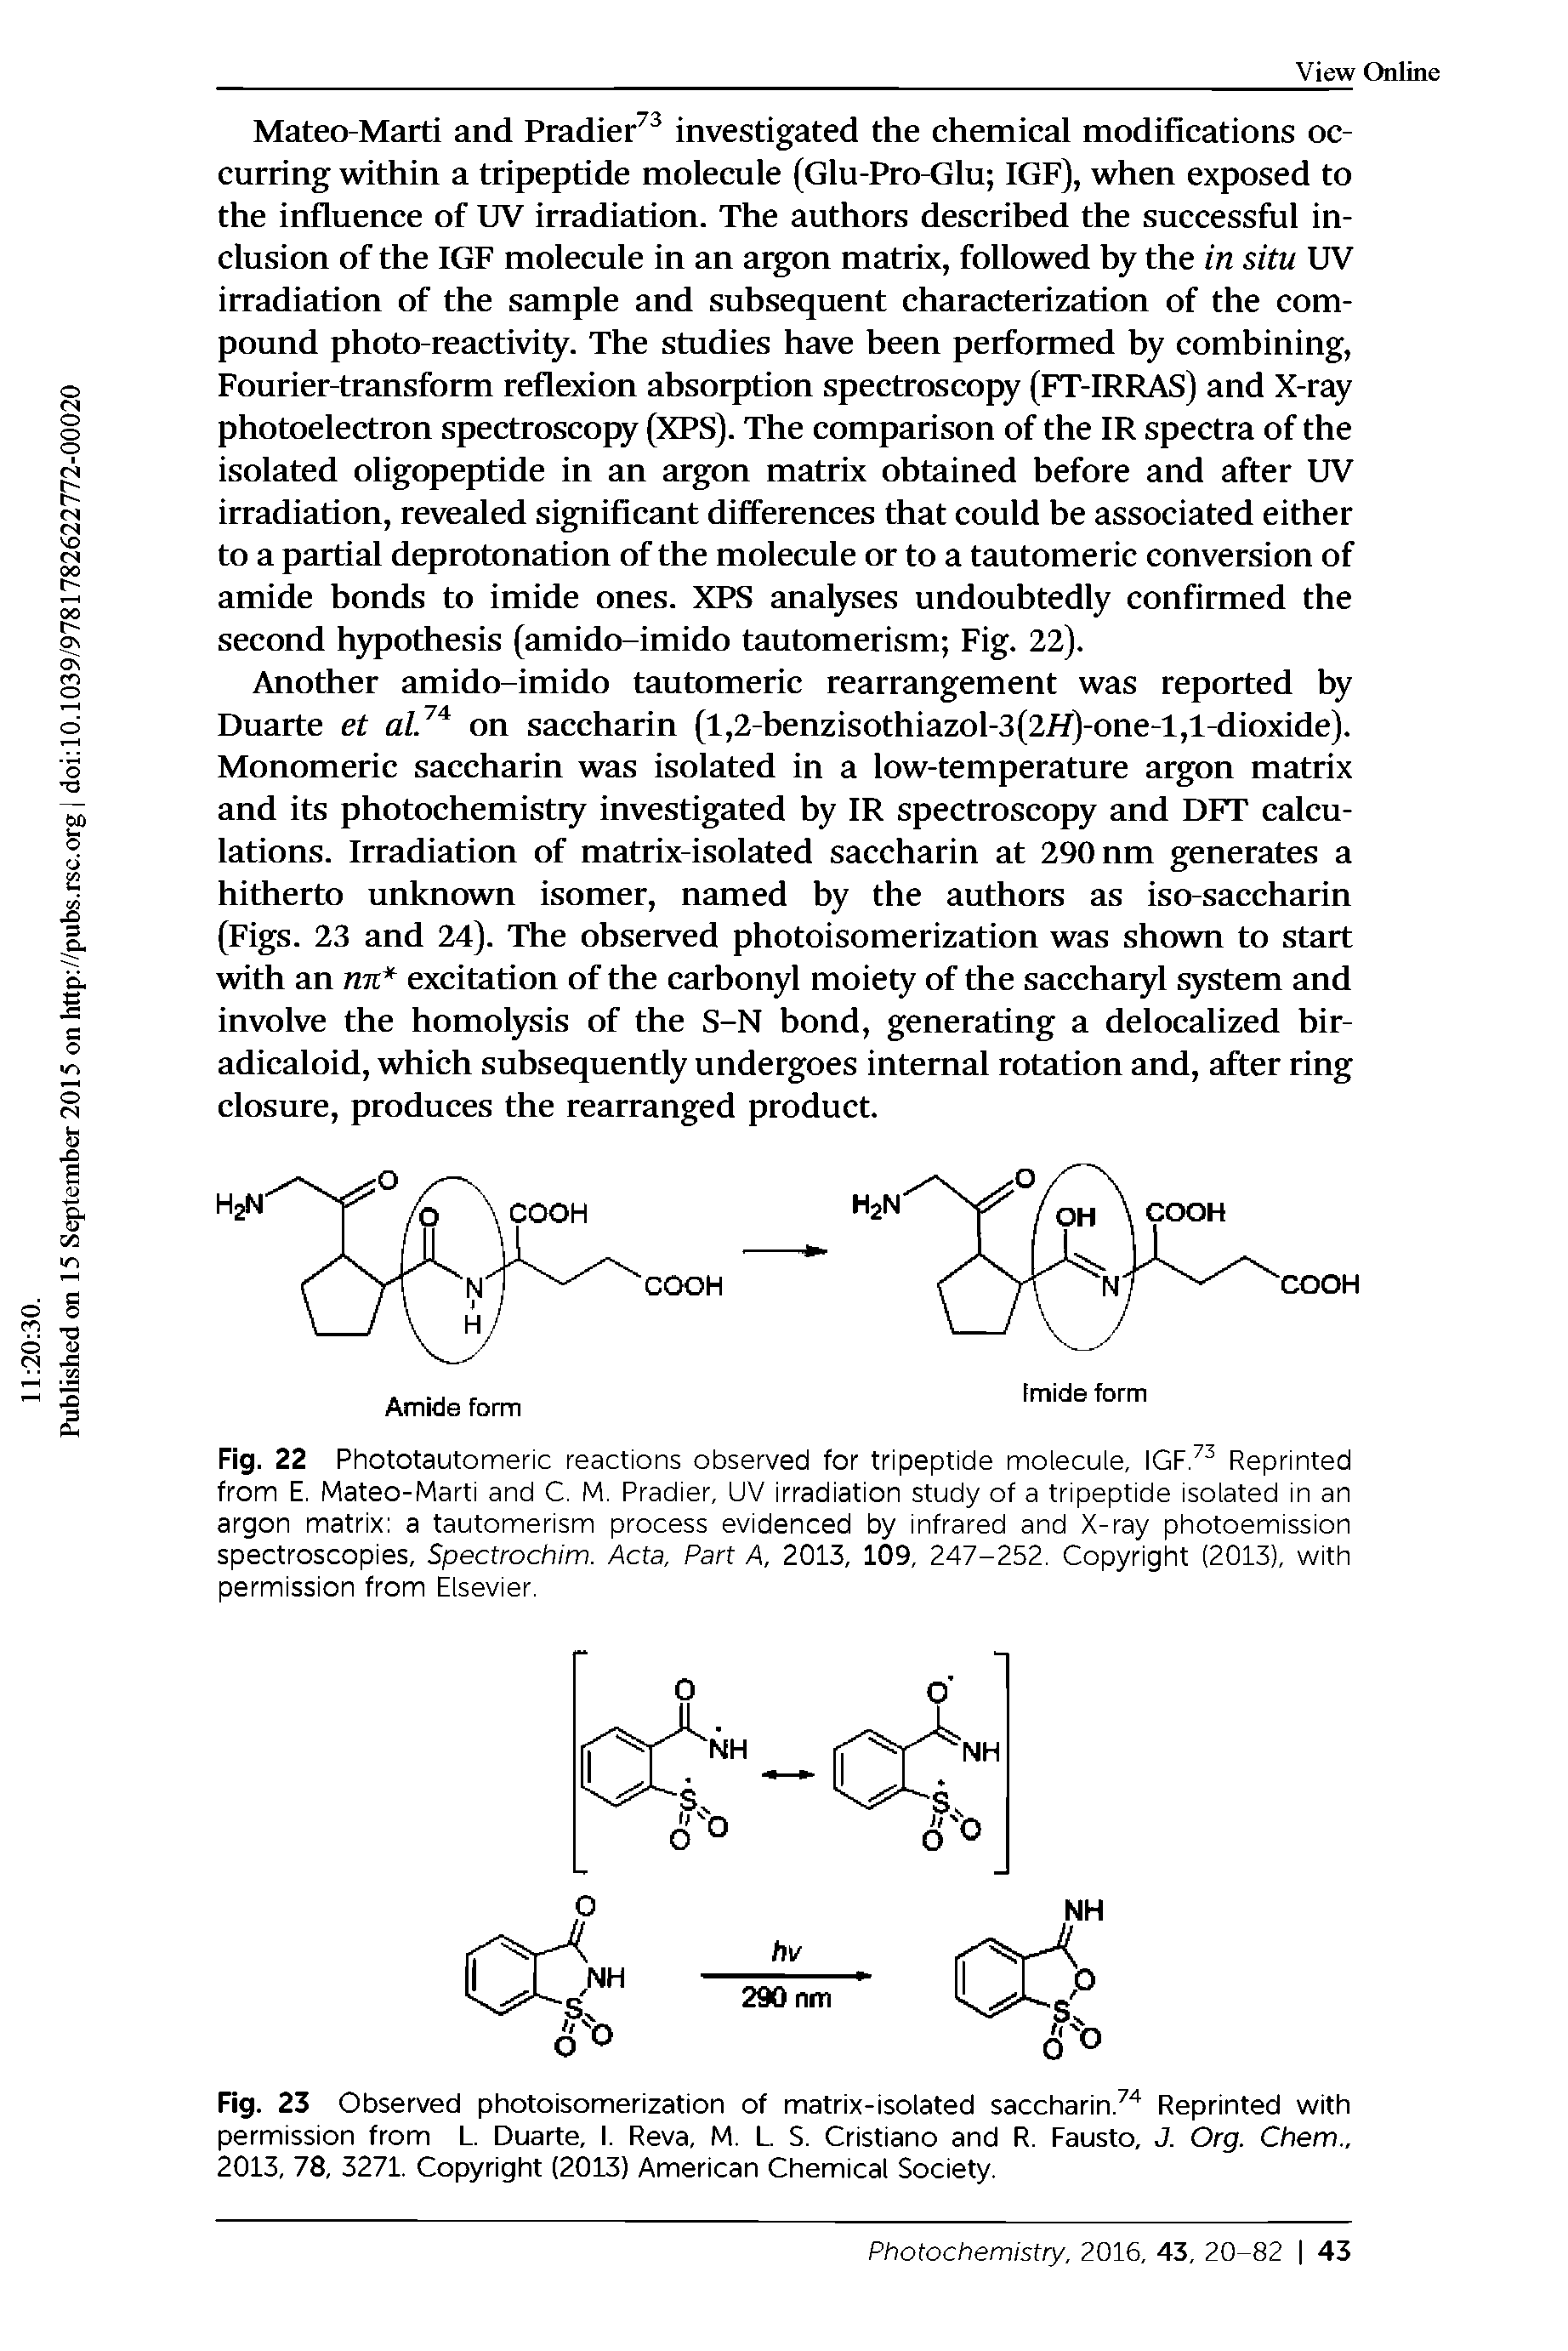 Fig. 22 Phototautomeric reactions observed for tripeptide molecule, IGF. Reprinted from E. Mateo-Marti and C. M. Pradier, UV irradiation study of a tripeptide isolated in an argon matrix a tautomerism process evidenced by infrared and X-ray photoemission spectroscopies, Spectrochim. Acta, Part A, 2013, 109, 247-252. Copyright (2013), with permissioh from Elsevier.